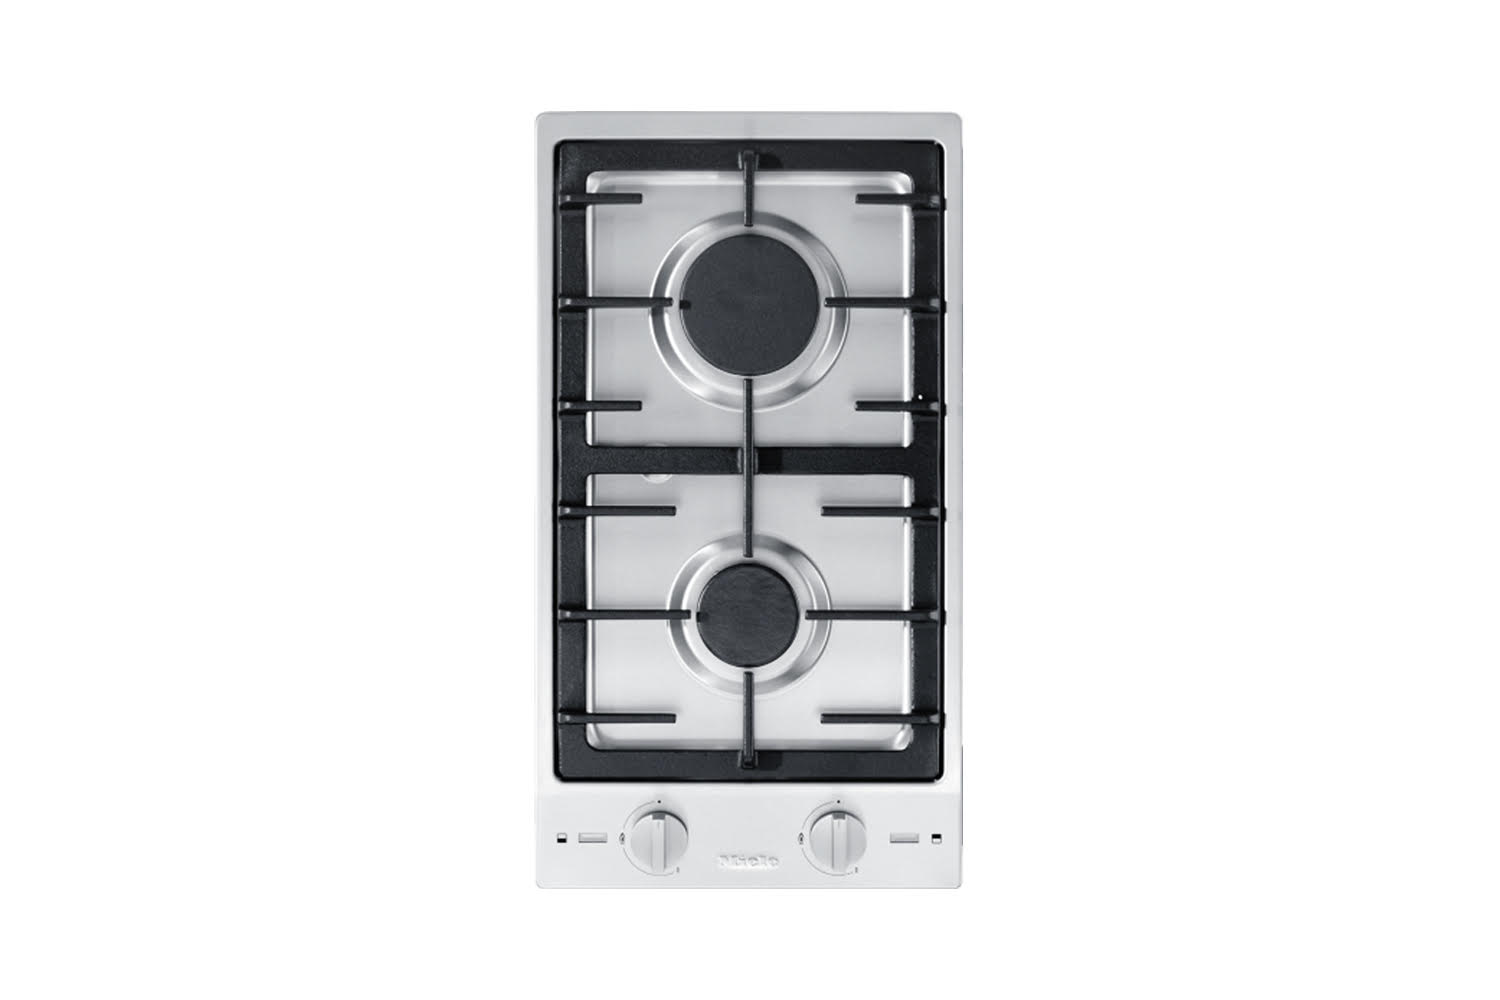 the demure miele double combiset gas cooktop measures just \1\2 inches wid 15